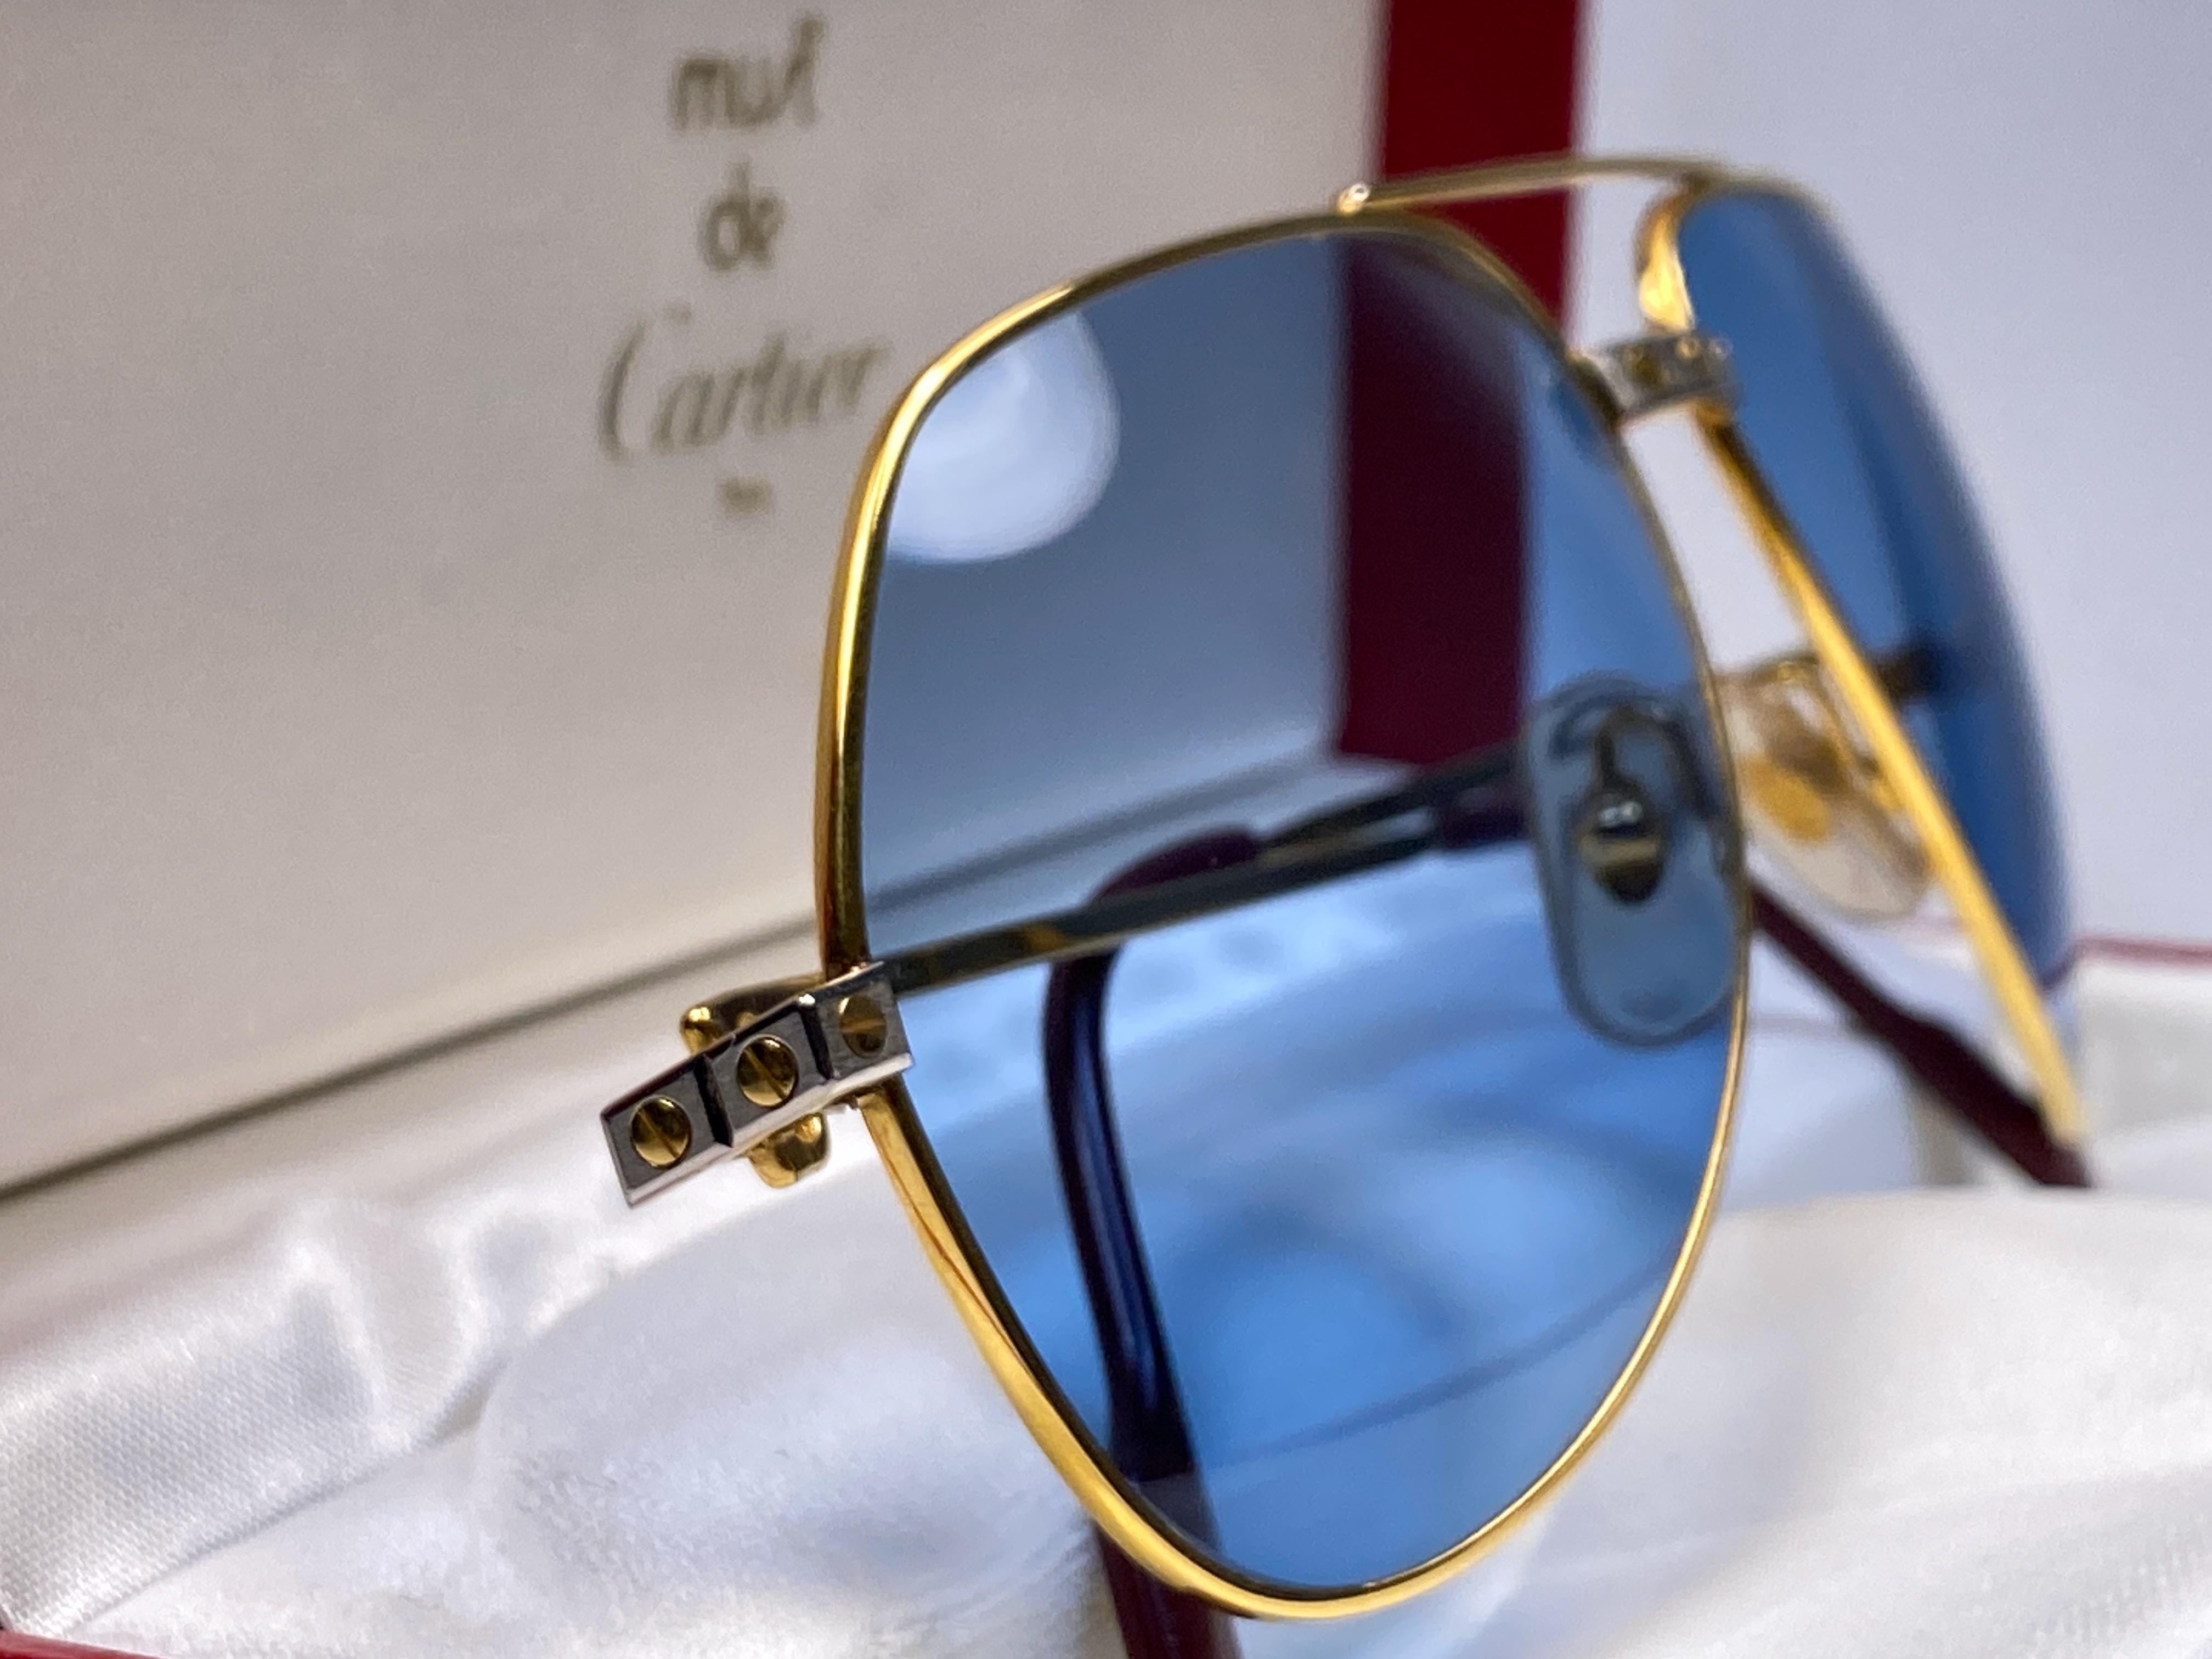 New Cartier Santos Screws 1983 62M 18K Heavy Plated Blue Lens Sunglasses France In New Condition For Sale In Baleares, Baleares